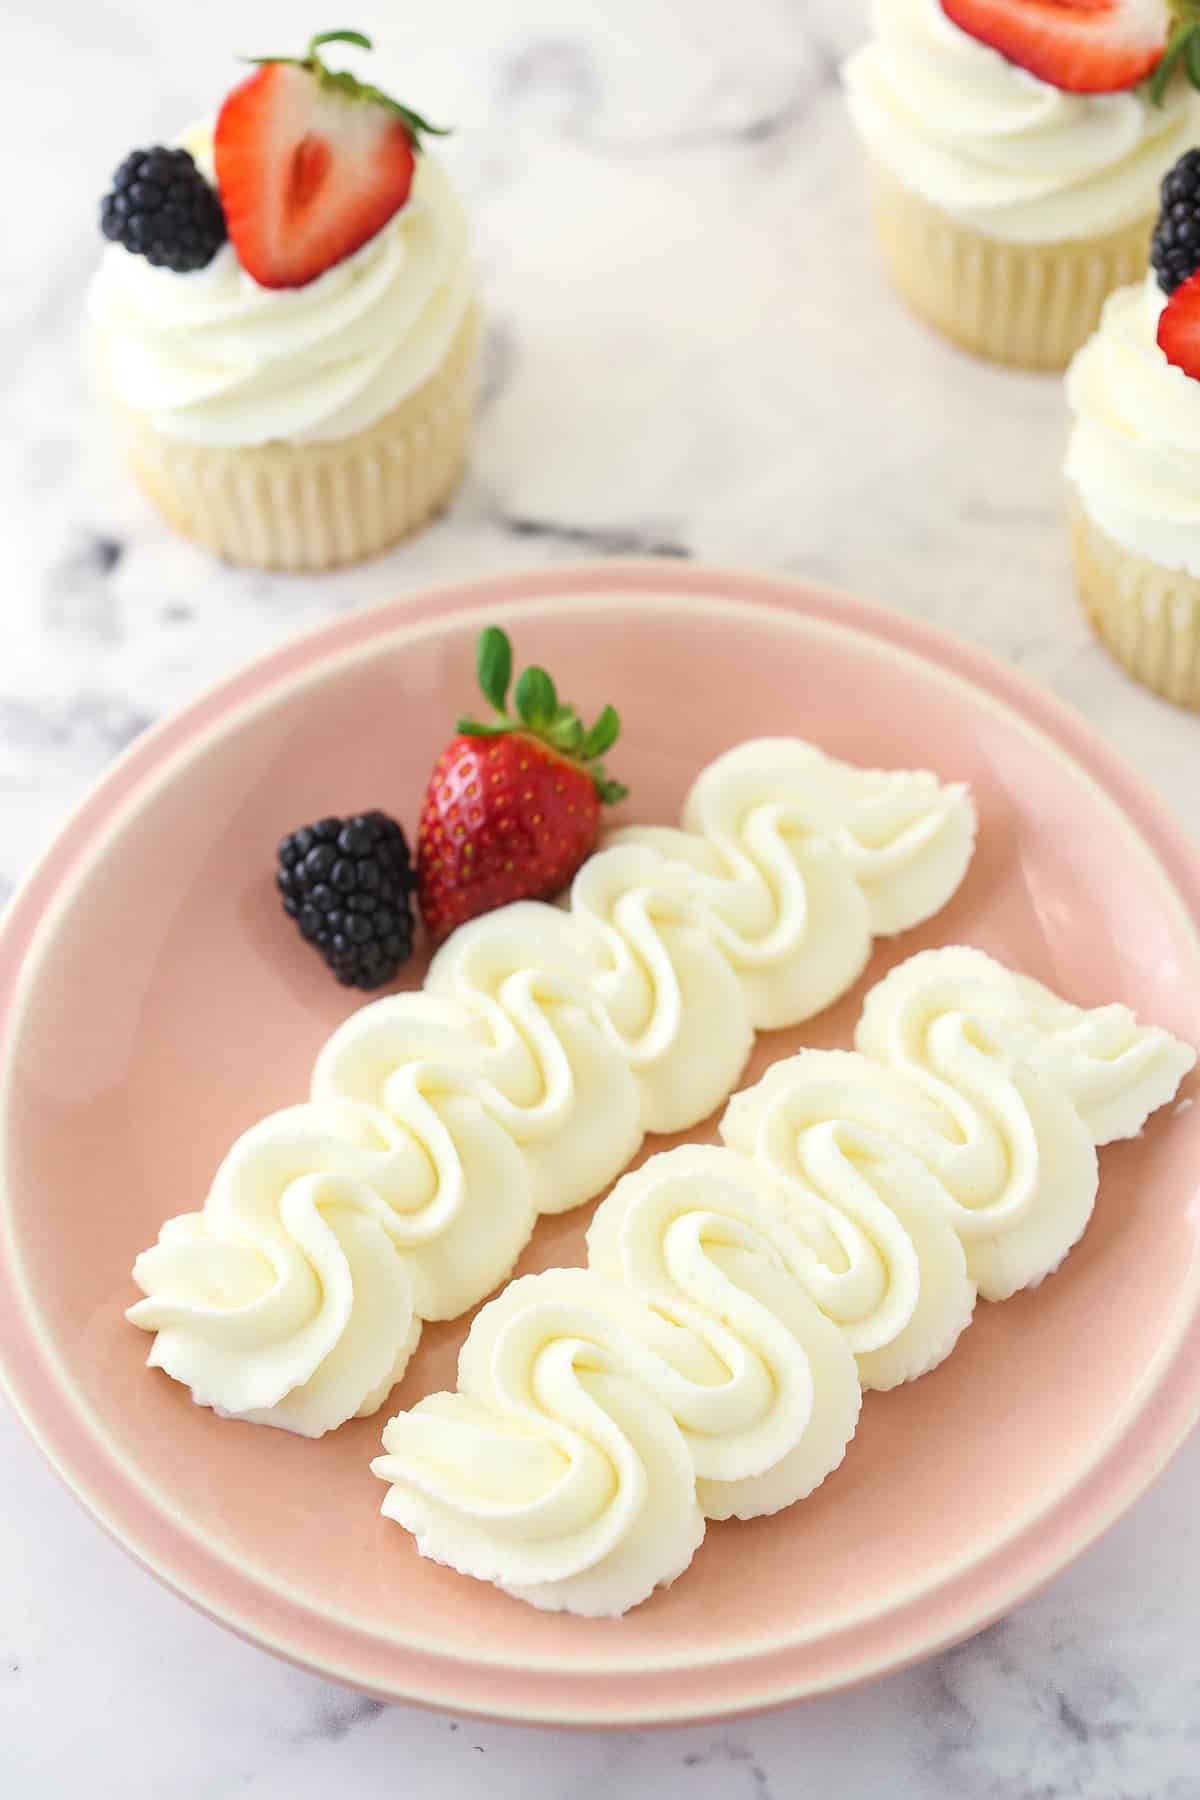 Whipped cream cheese frosting piped onto a plate with fresh berries surrounded by frosted cupcakes.